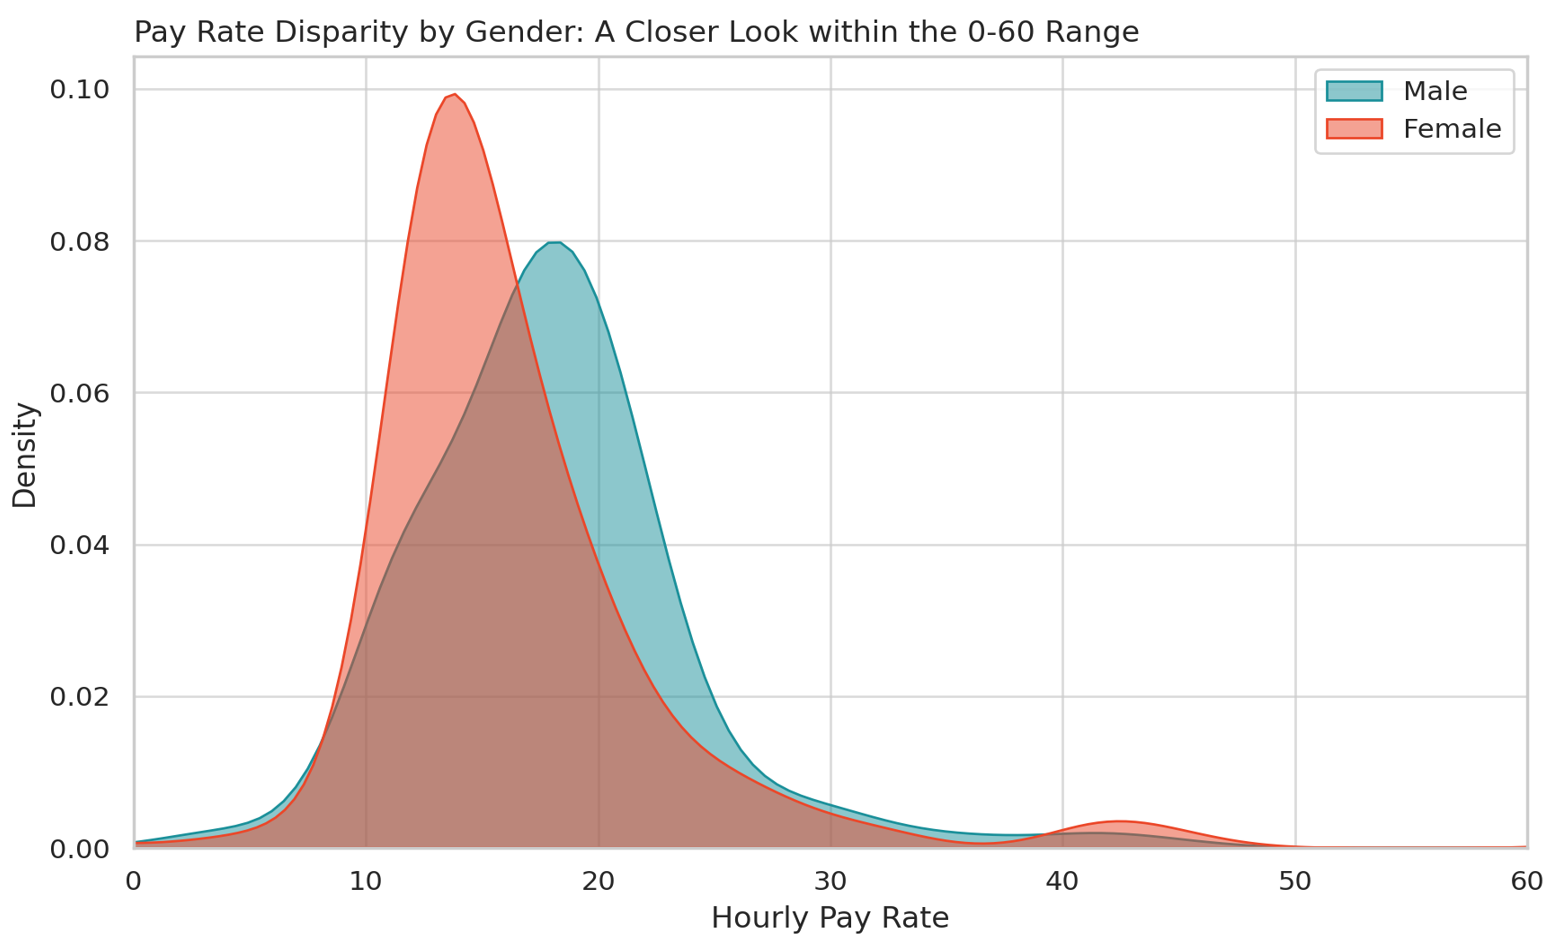 Pay rate disparity by gender - a closer look at the 0-60 range